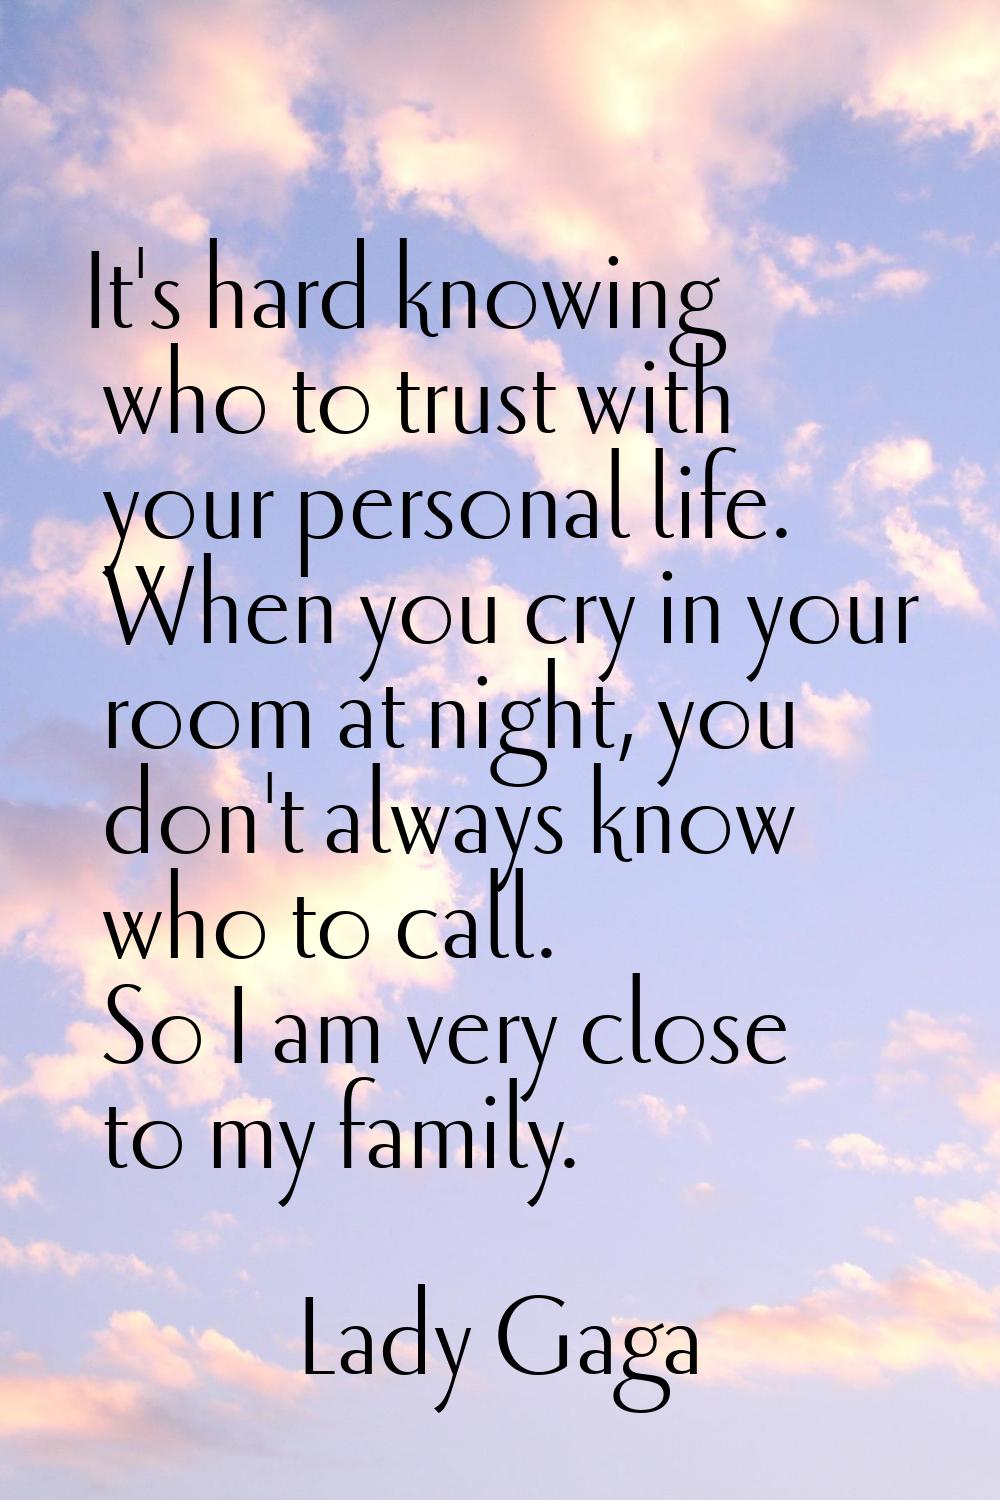 It's hard knowing who to trust with your personal life. When you cry in your room at night, you don